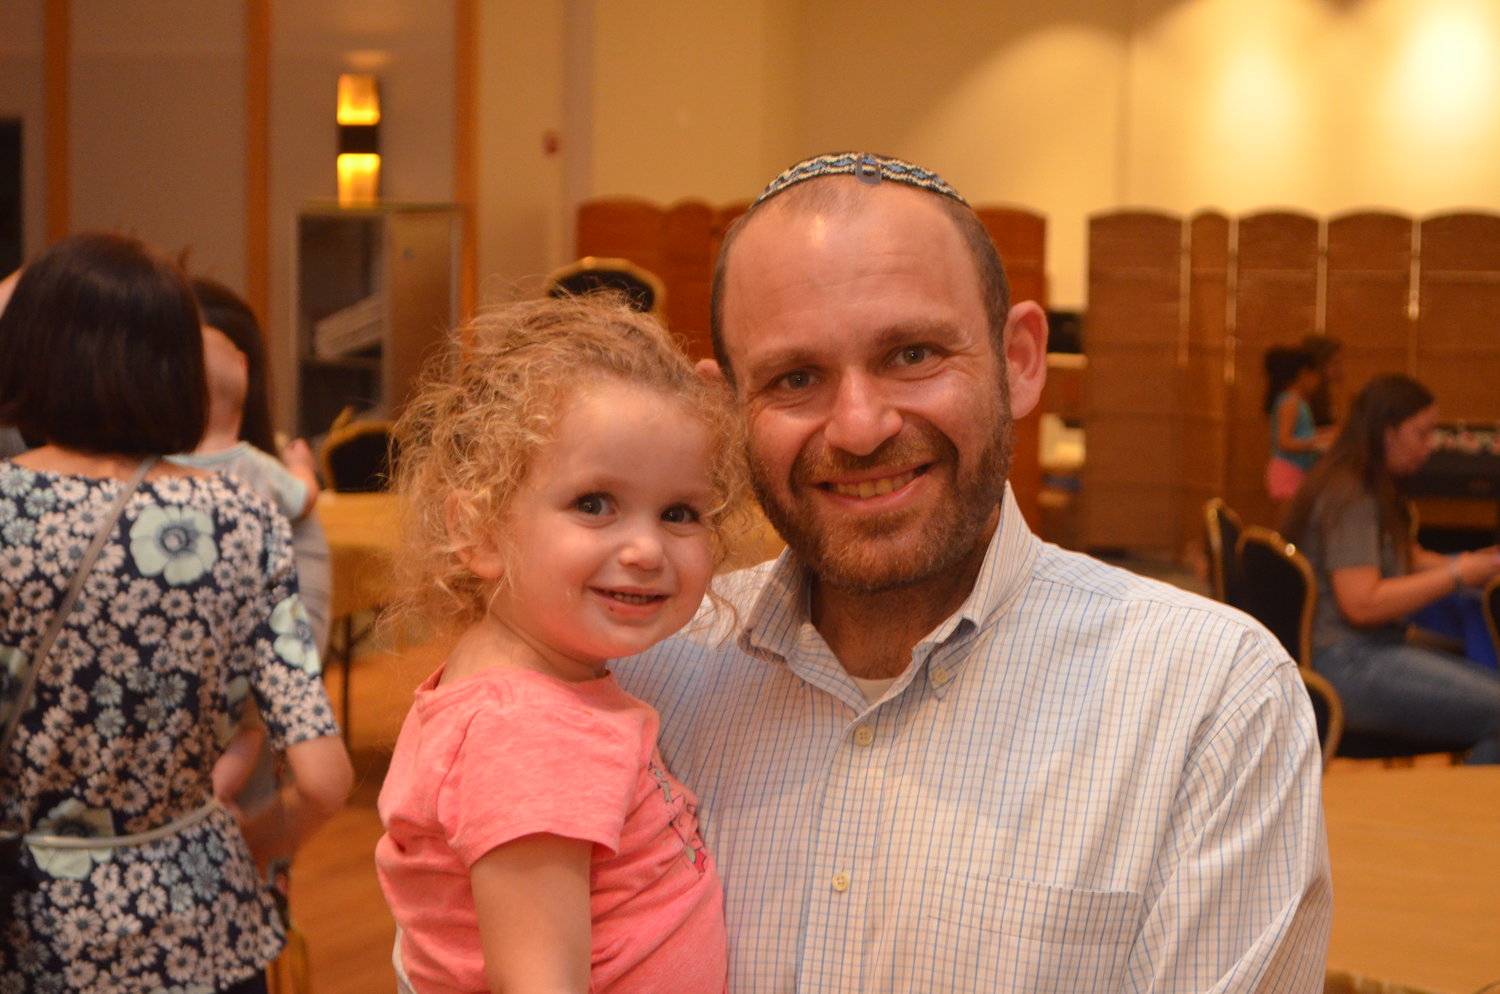 Rabbi Joshua Dorsch — here with his daughter, Ziva, at a Hebrew school open house — began his role at the Merrick Jewish Centre-Congregation Ohr Torah on July 15, filling a permanent    position left vacant by the now-retired rabbi Charles Klein.